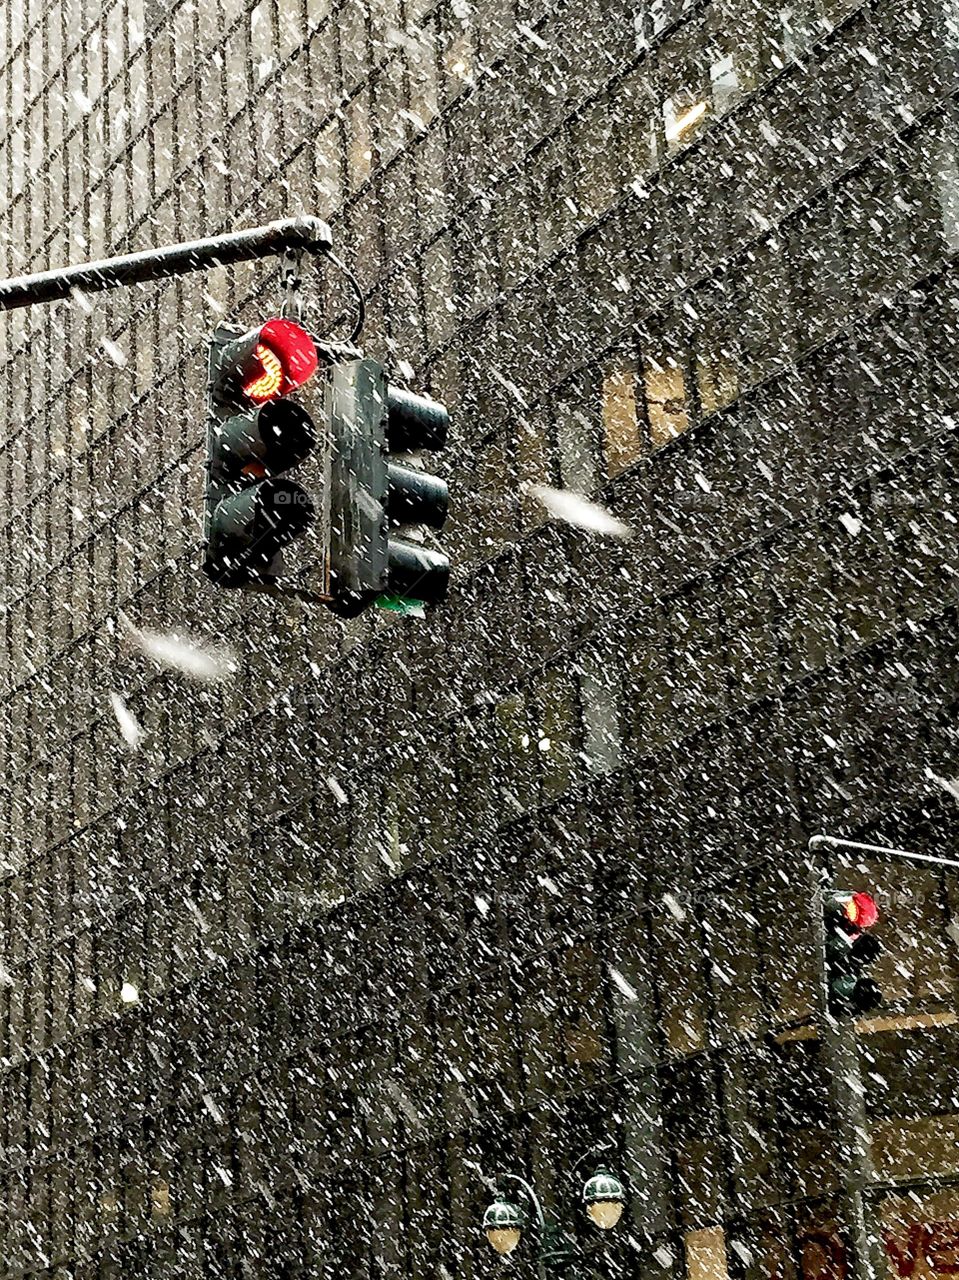 Spring Snow Fall in New York. Spring Snow Fall in New York